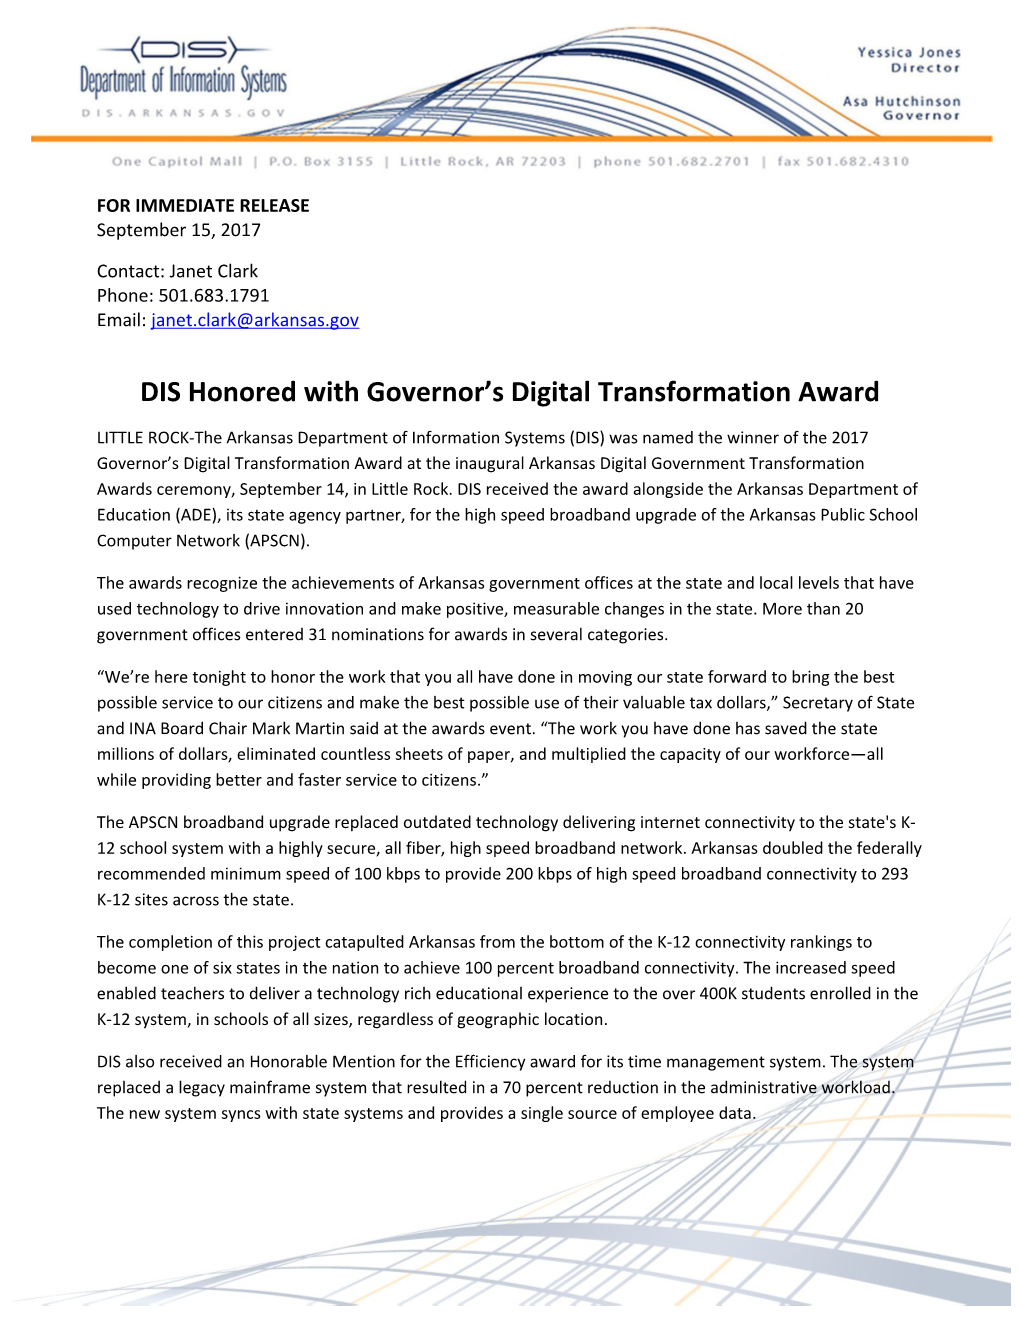 DIS Honored with Governor S Digital Transformation Award